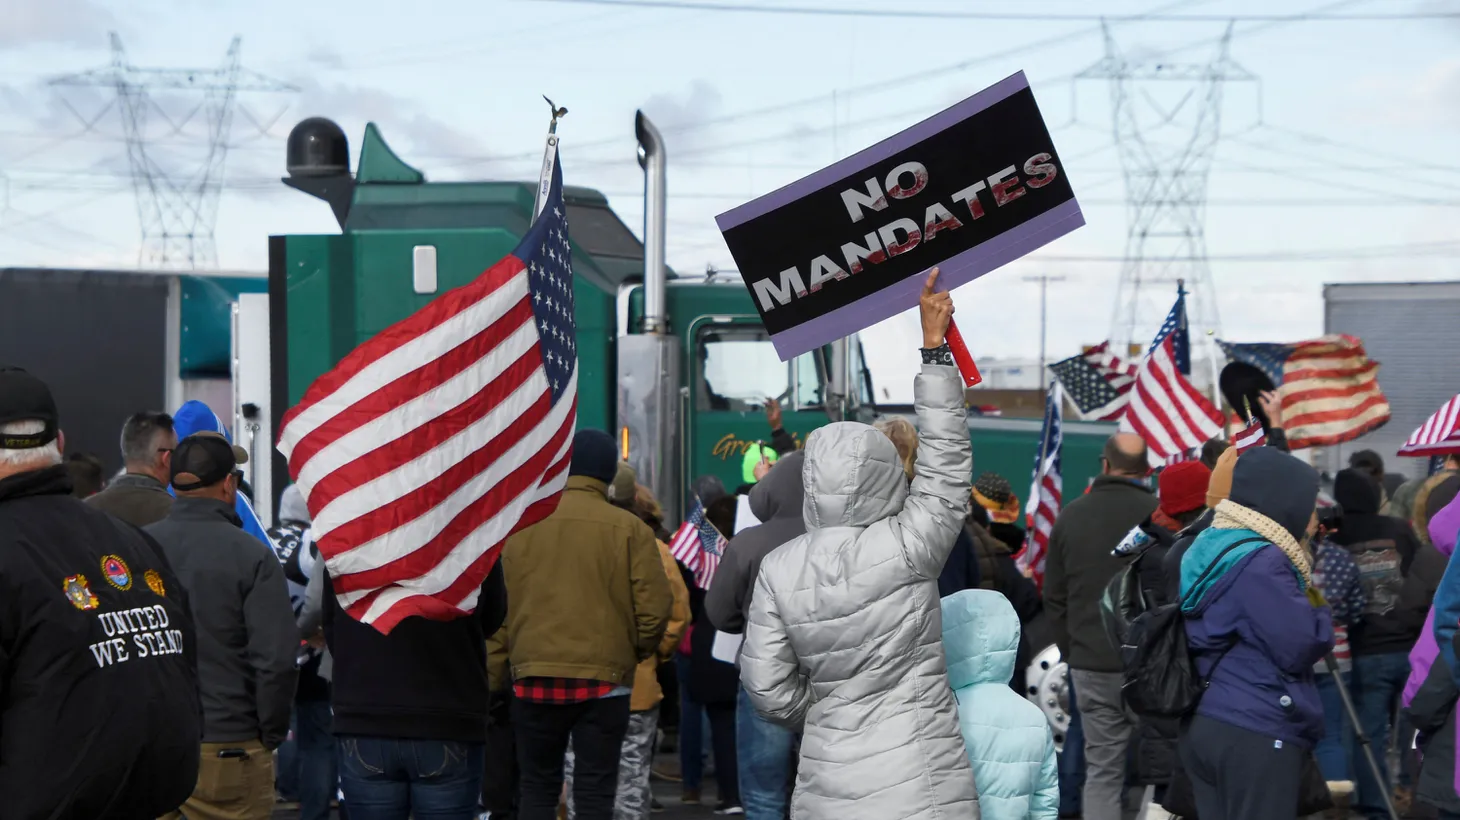 Truckers and their supporters form a convoy bound for the nation's capital to protest coronavirus disease (COVID-19) vaccine mandates, in Adelanto, California, U.S. February 23, 2022.